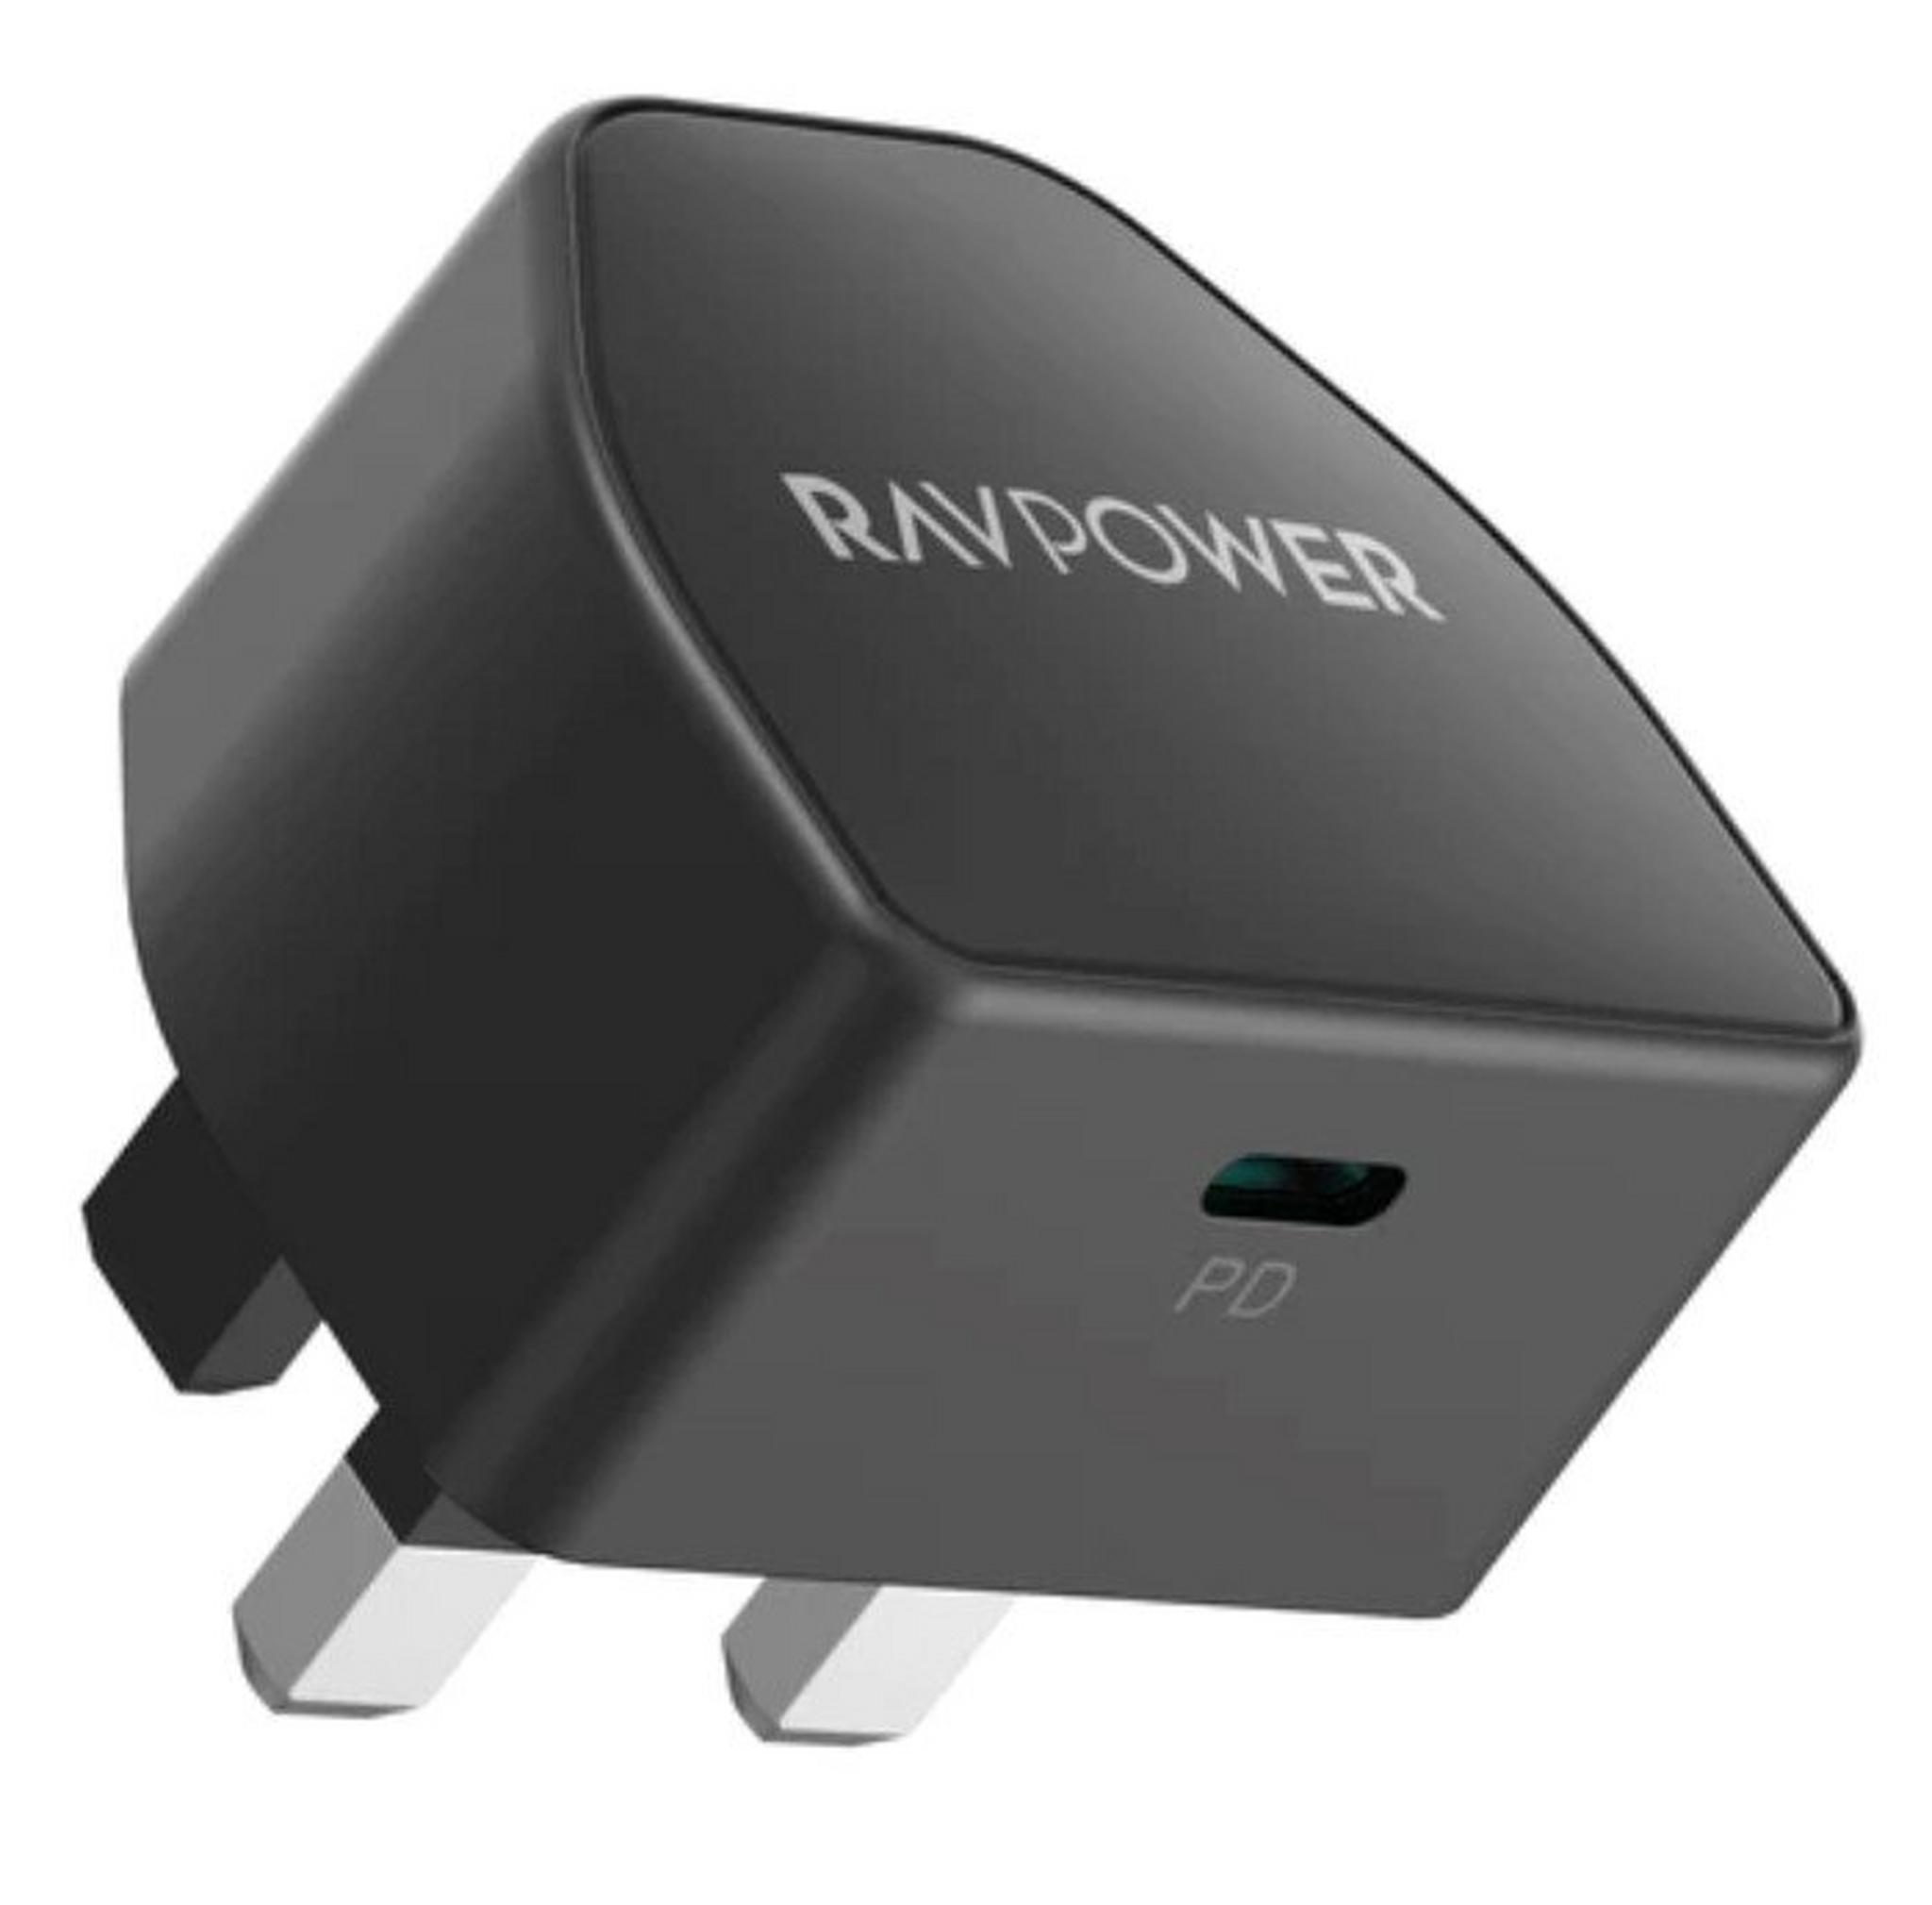 RAVPOWER PD Pioneer USB-C Wall Charger, 20 Watts, RP-PC1041 – Black